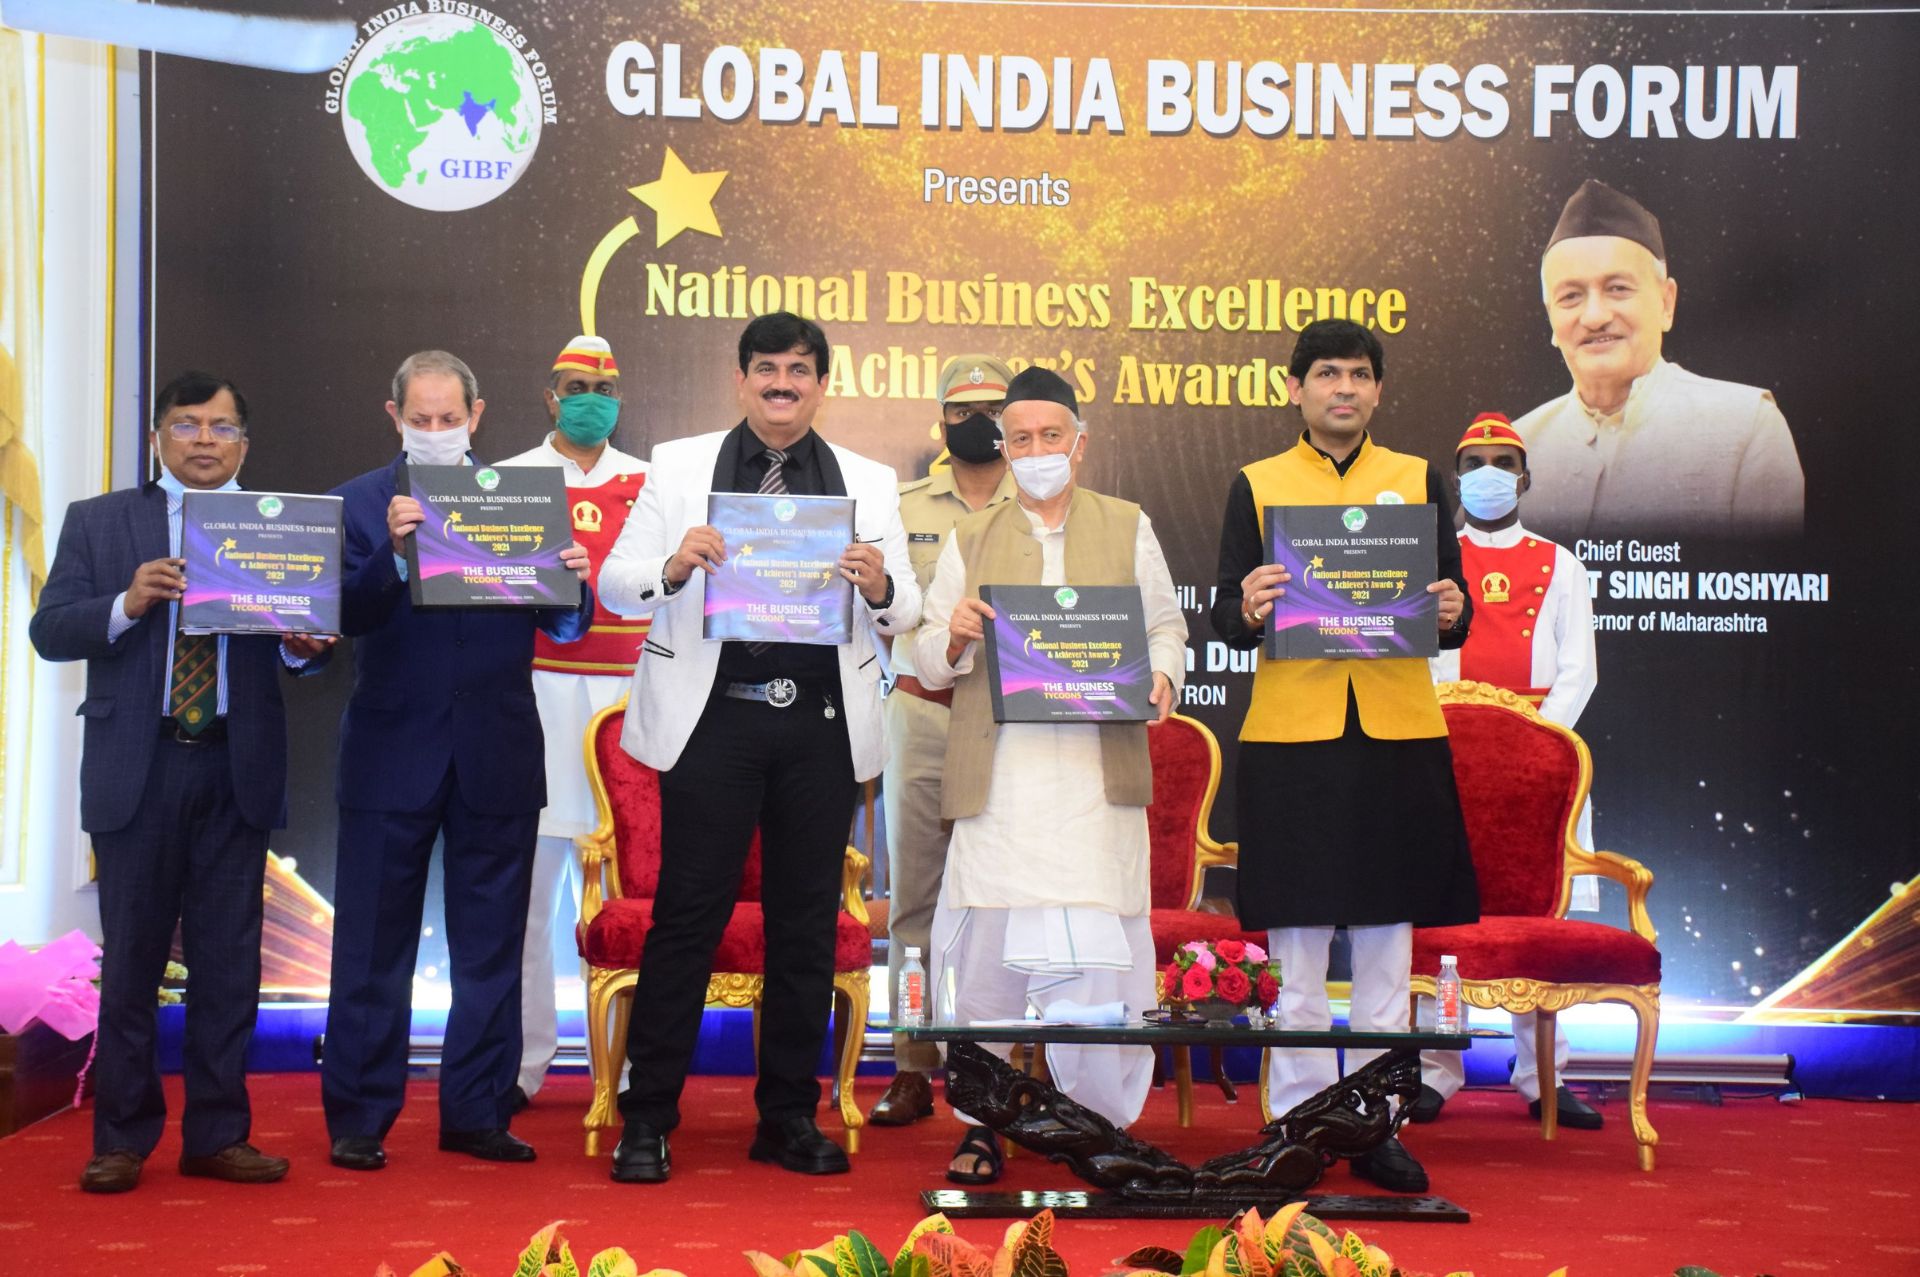 Inauguration of The Business Tycoons Magazine in GIBF National Business Excellence and Achievers Awards